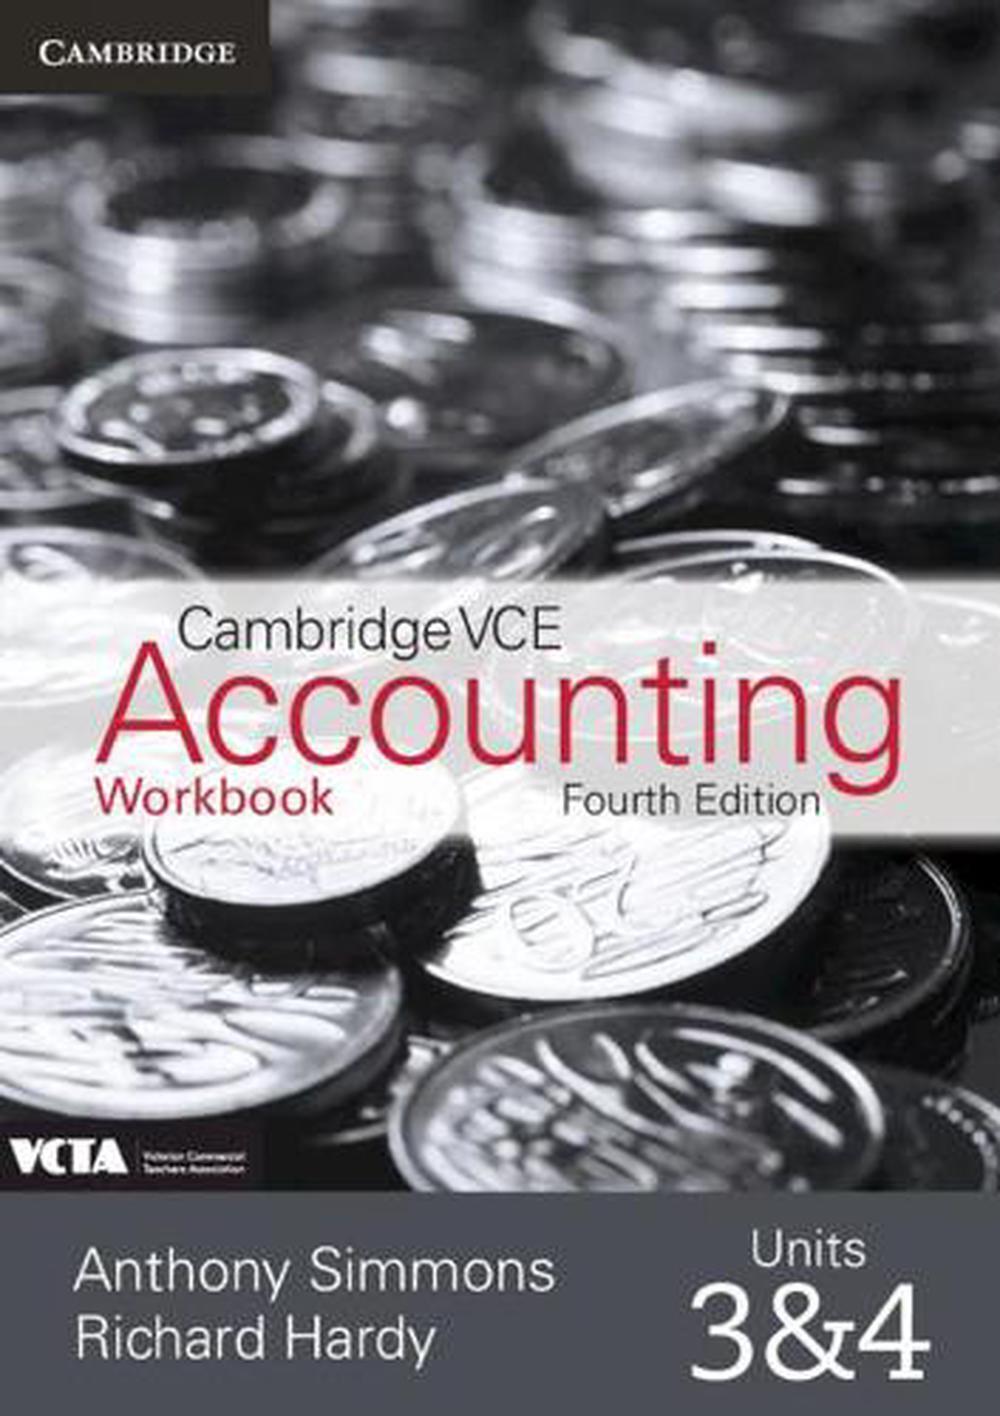 cambridge vce accounting units 3 and 4 workbook 4th edition richard hardy, anthony simmons 1108469906,